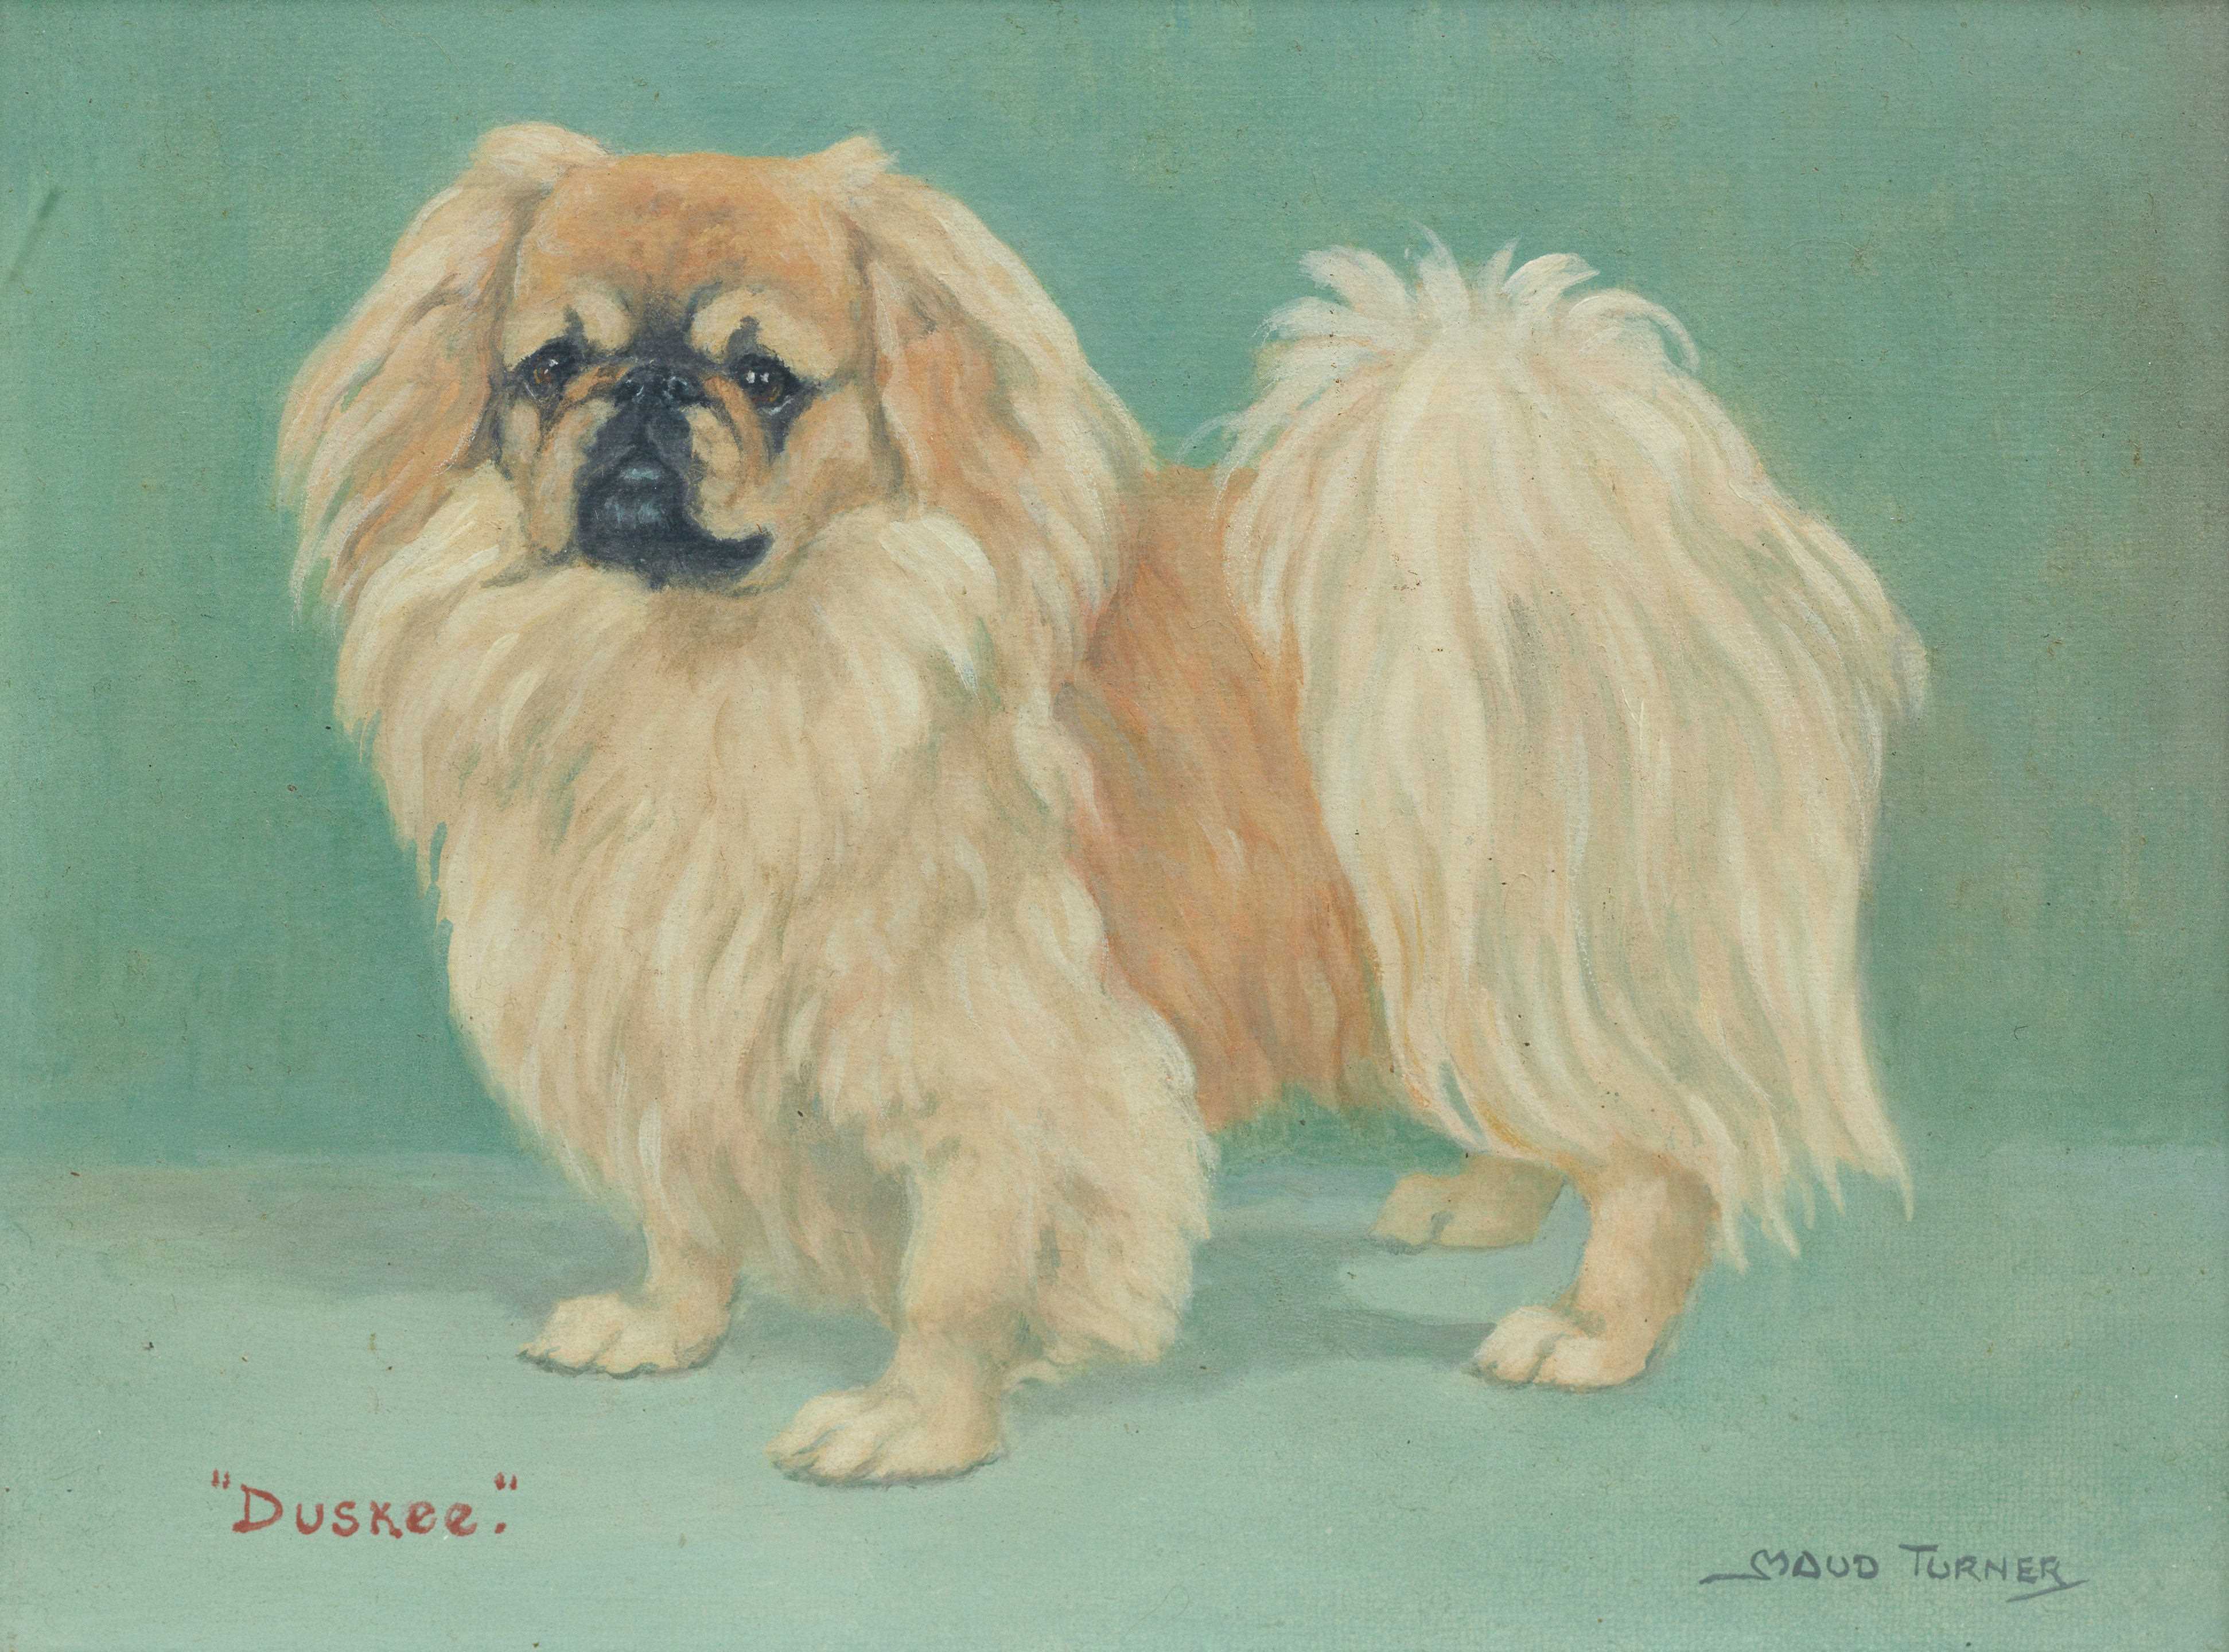 Click for larger image: The Pekingese standing, Duskee of Tzumiao by Miss Maud M Turner (English, 1862 - 1947) - The Pekingese standing, Duskee of Tzumiao by Miss Maud M Turner (English, 1862 - 1947)